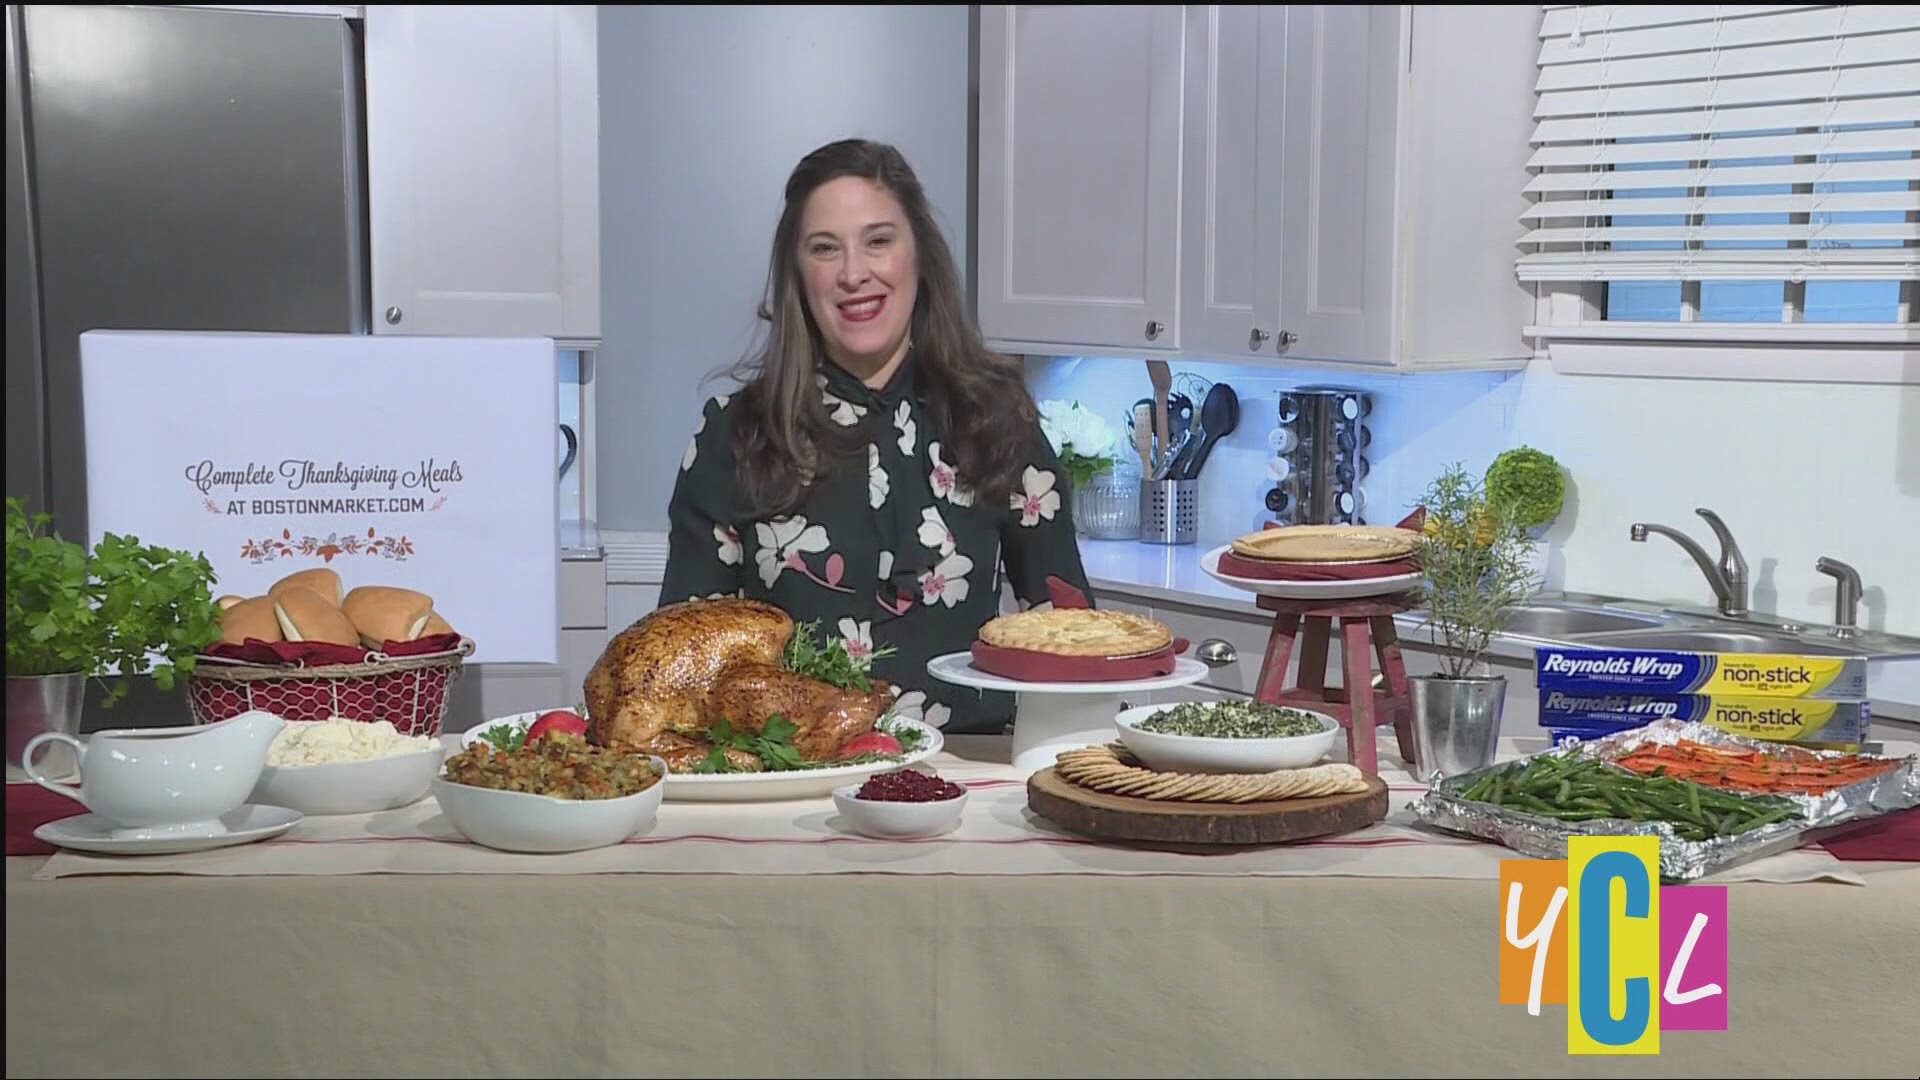 Tips to make the holidays more delicious and enjoyable for you and your guests!. The following is a paid segment sponsored by Boston Market and Reynolds Wrap.